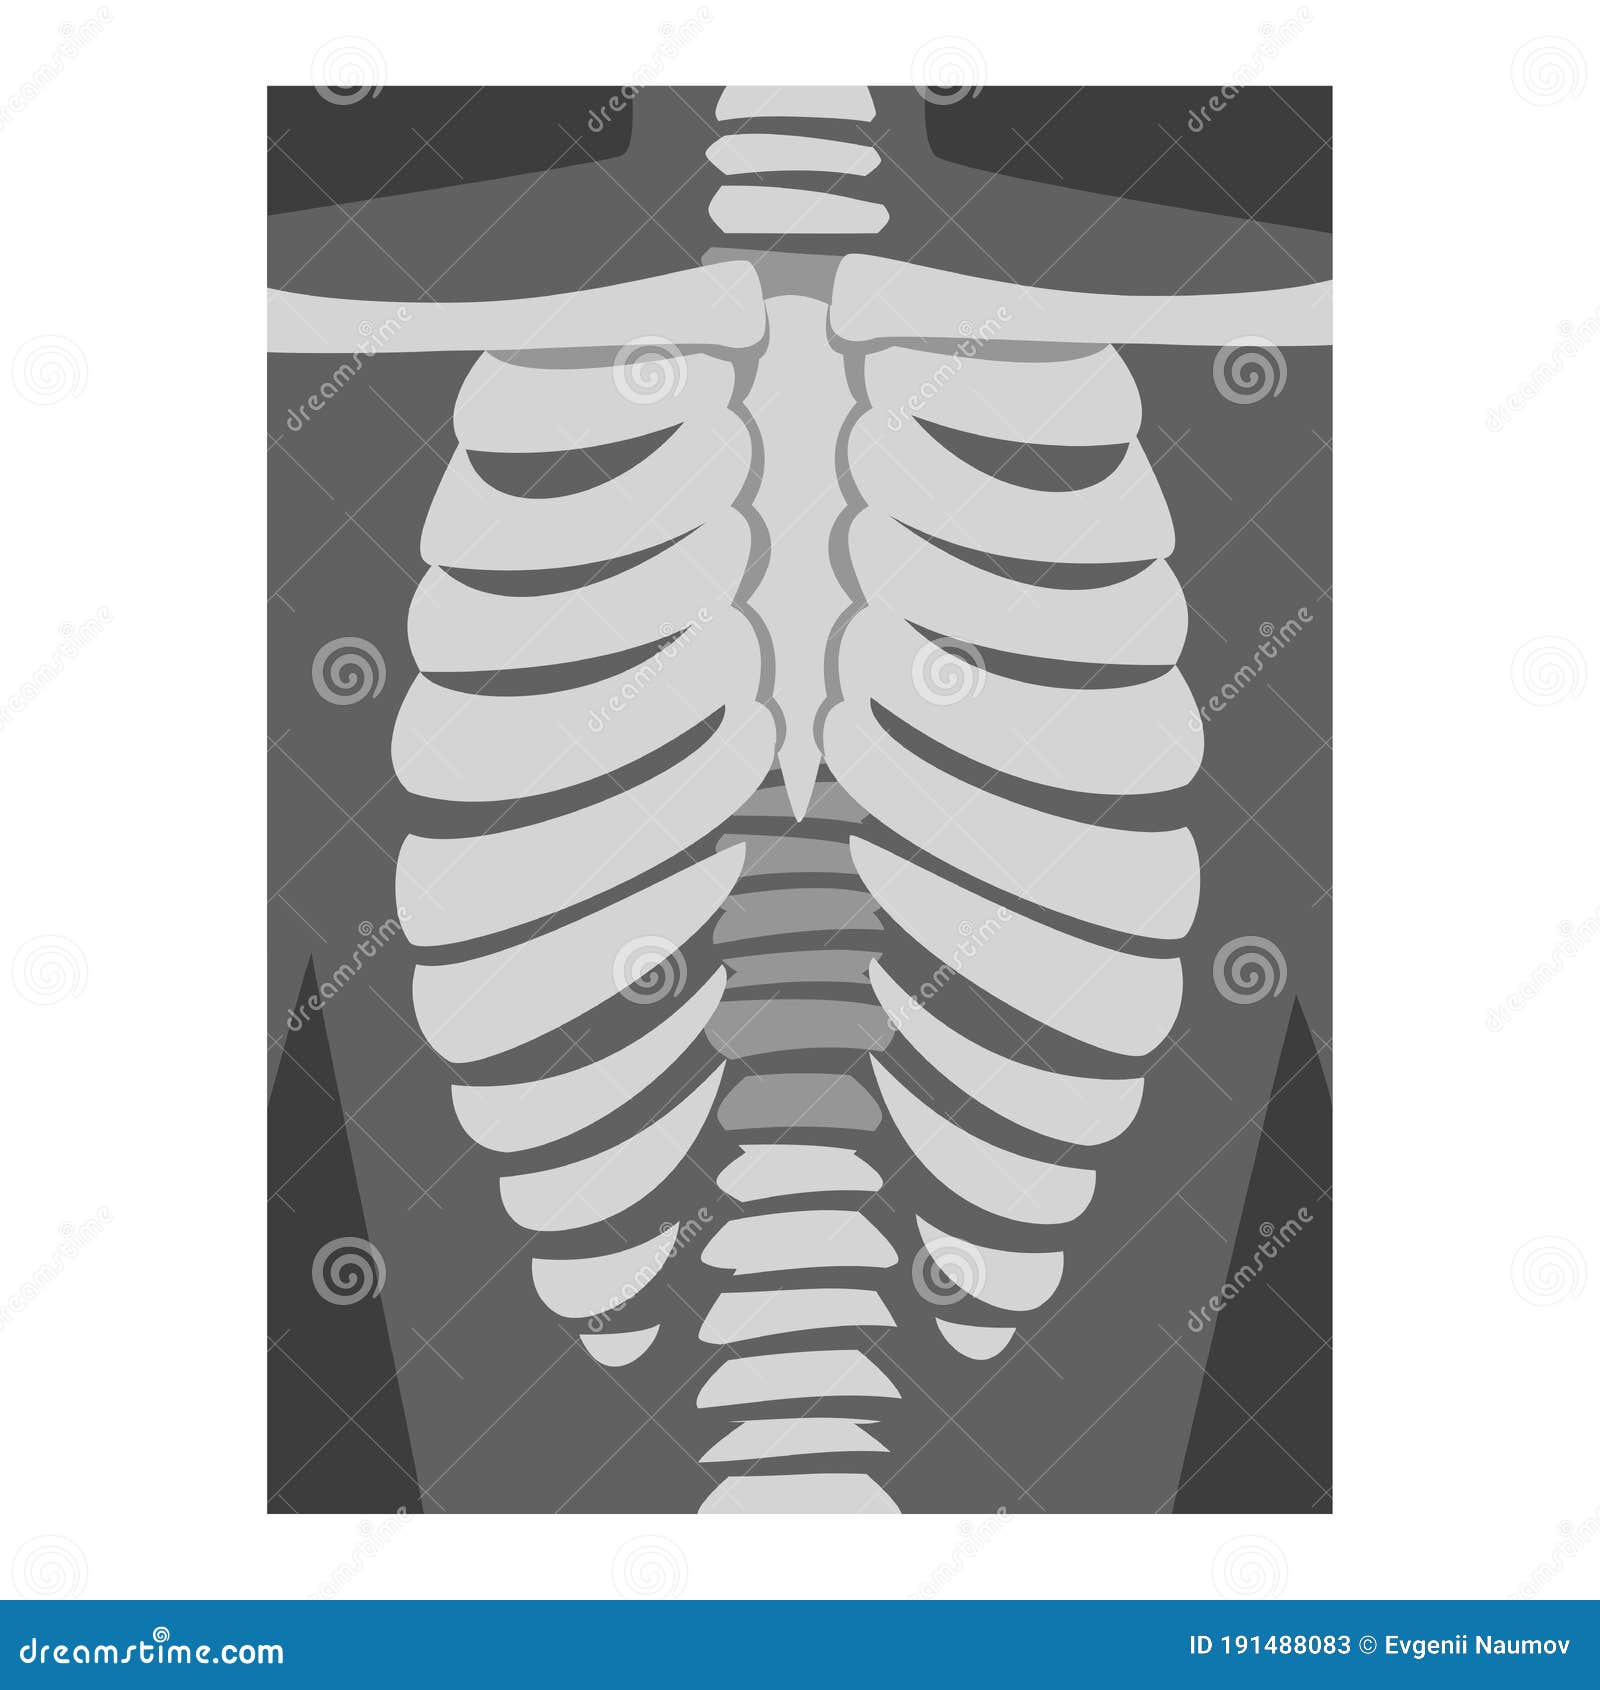 roentgenograph of spine and back bone  image